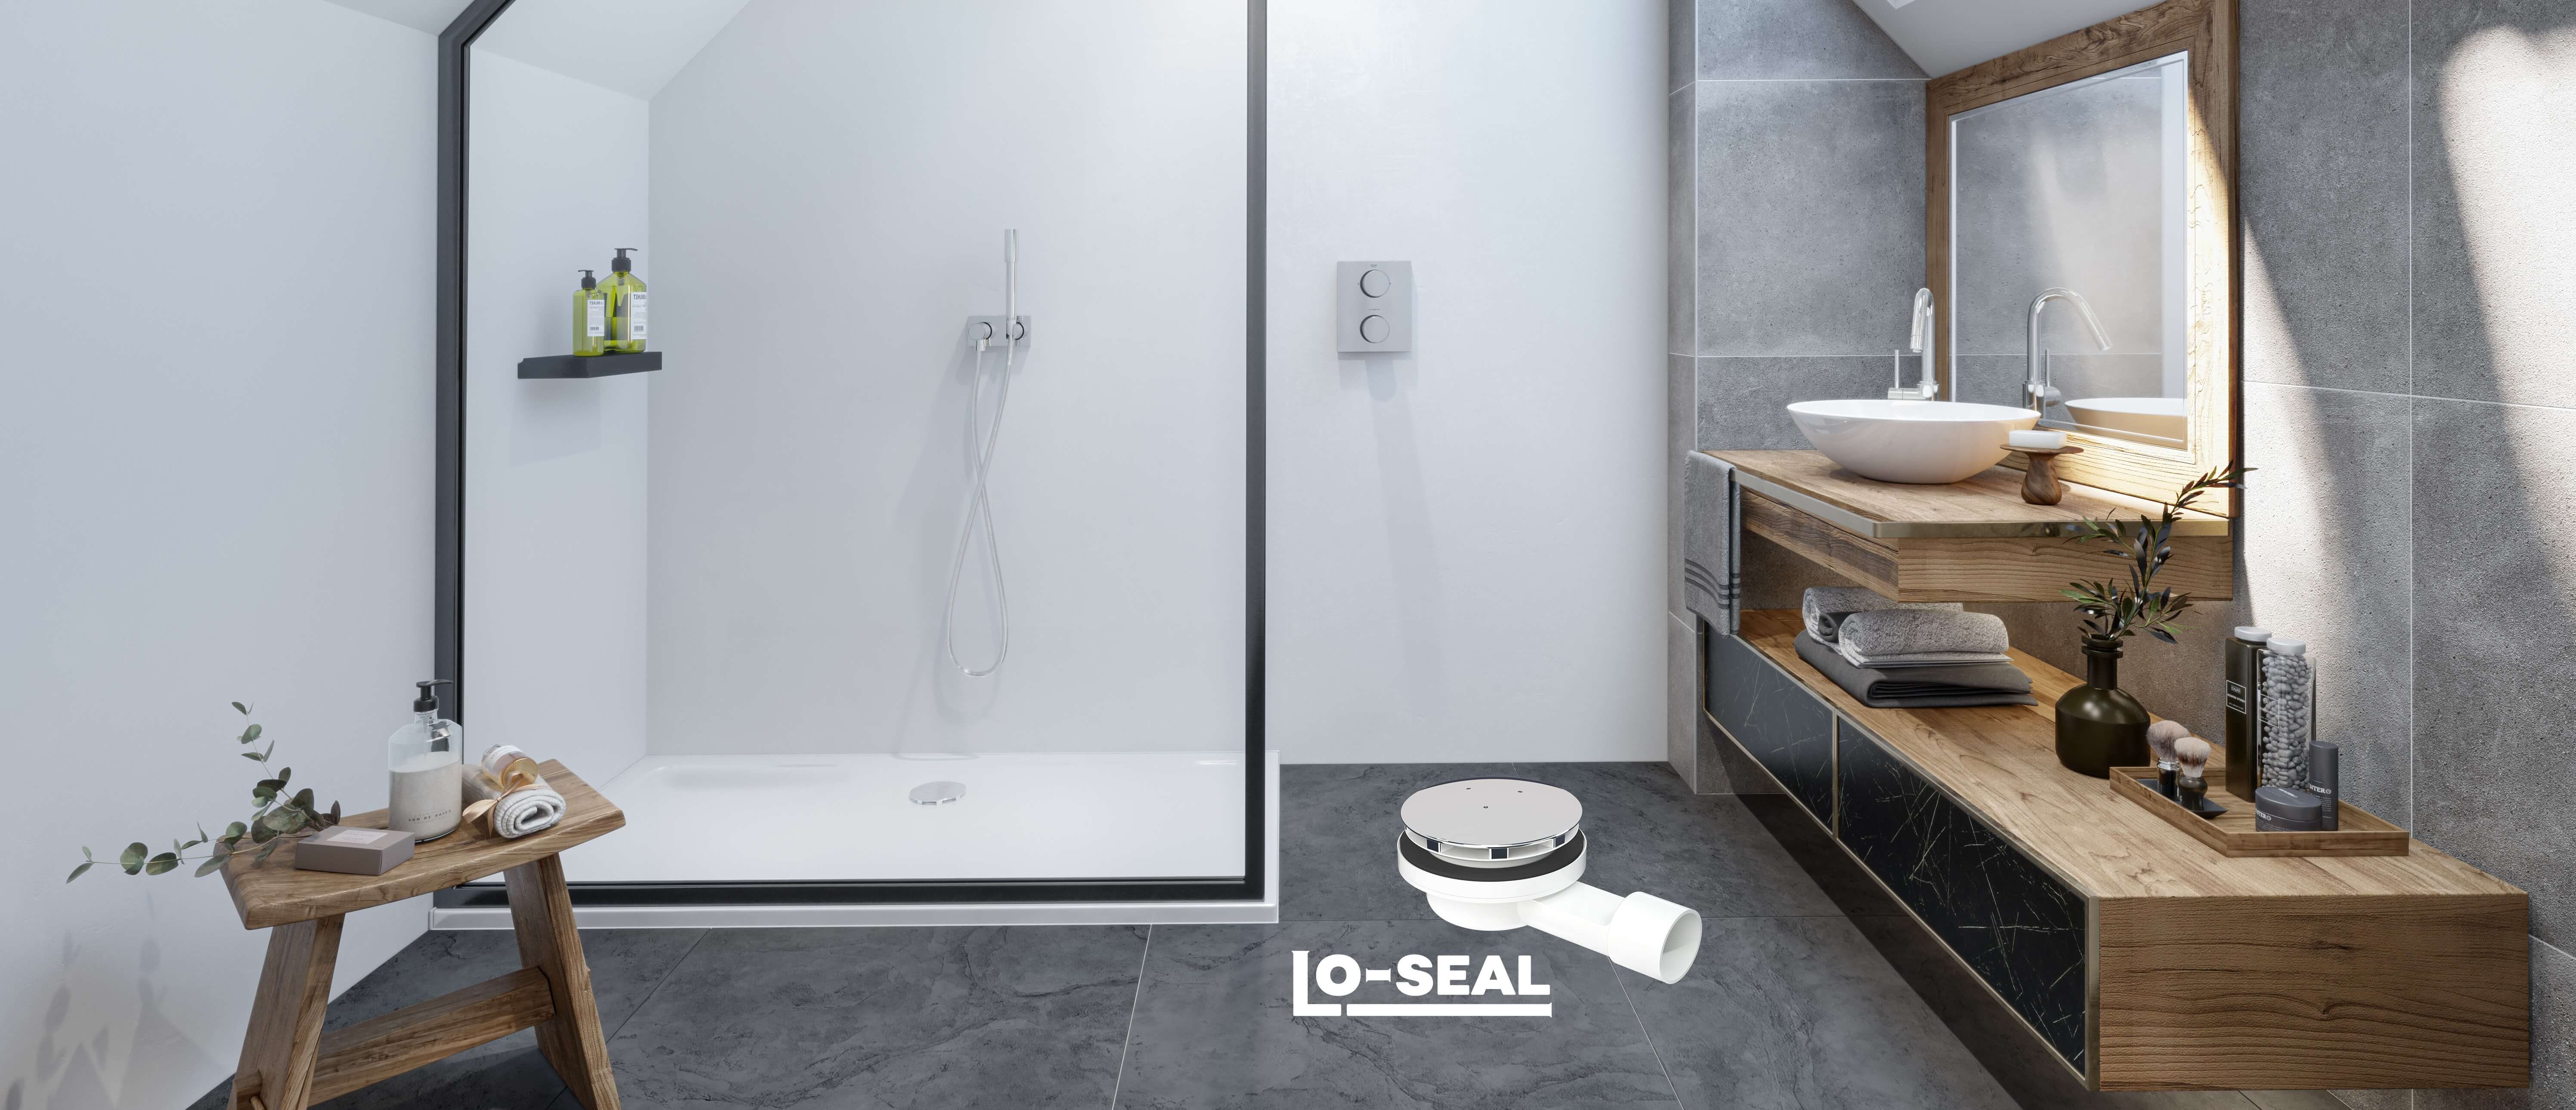 Garla-Shower-Tray-on-Tiled-Floor-Bathroom-6-with-trap-and-lo-seal-cropped